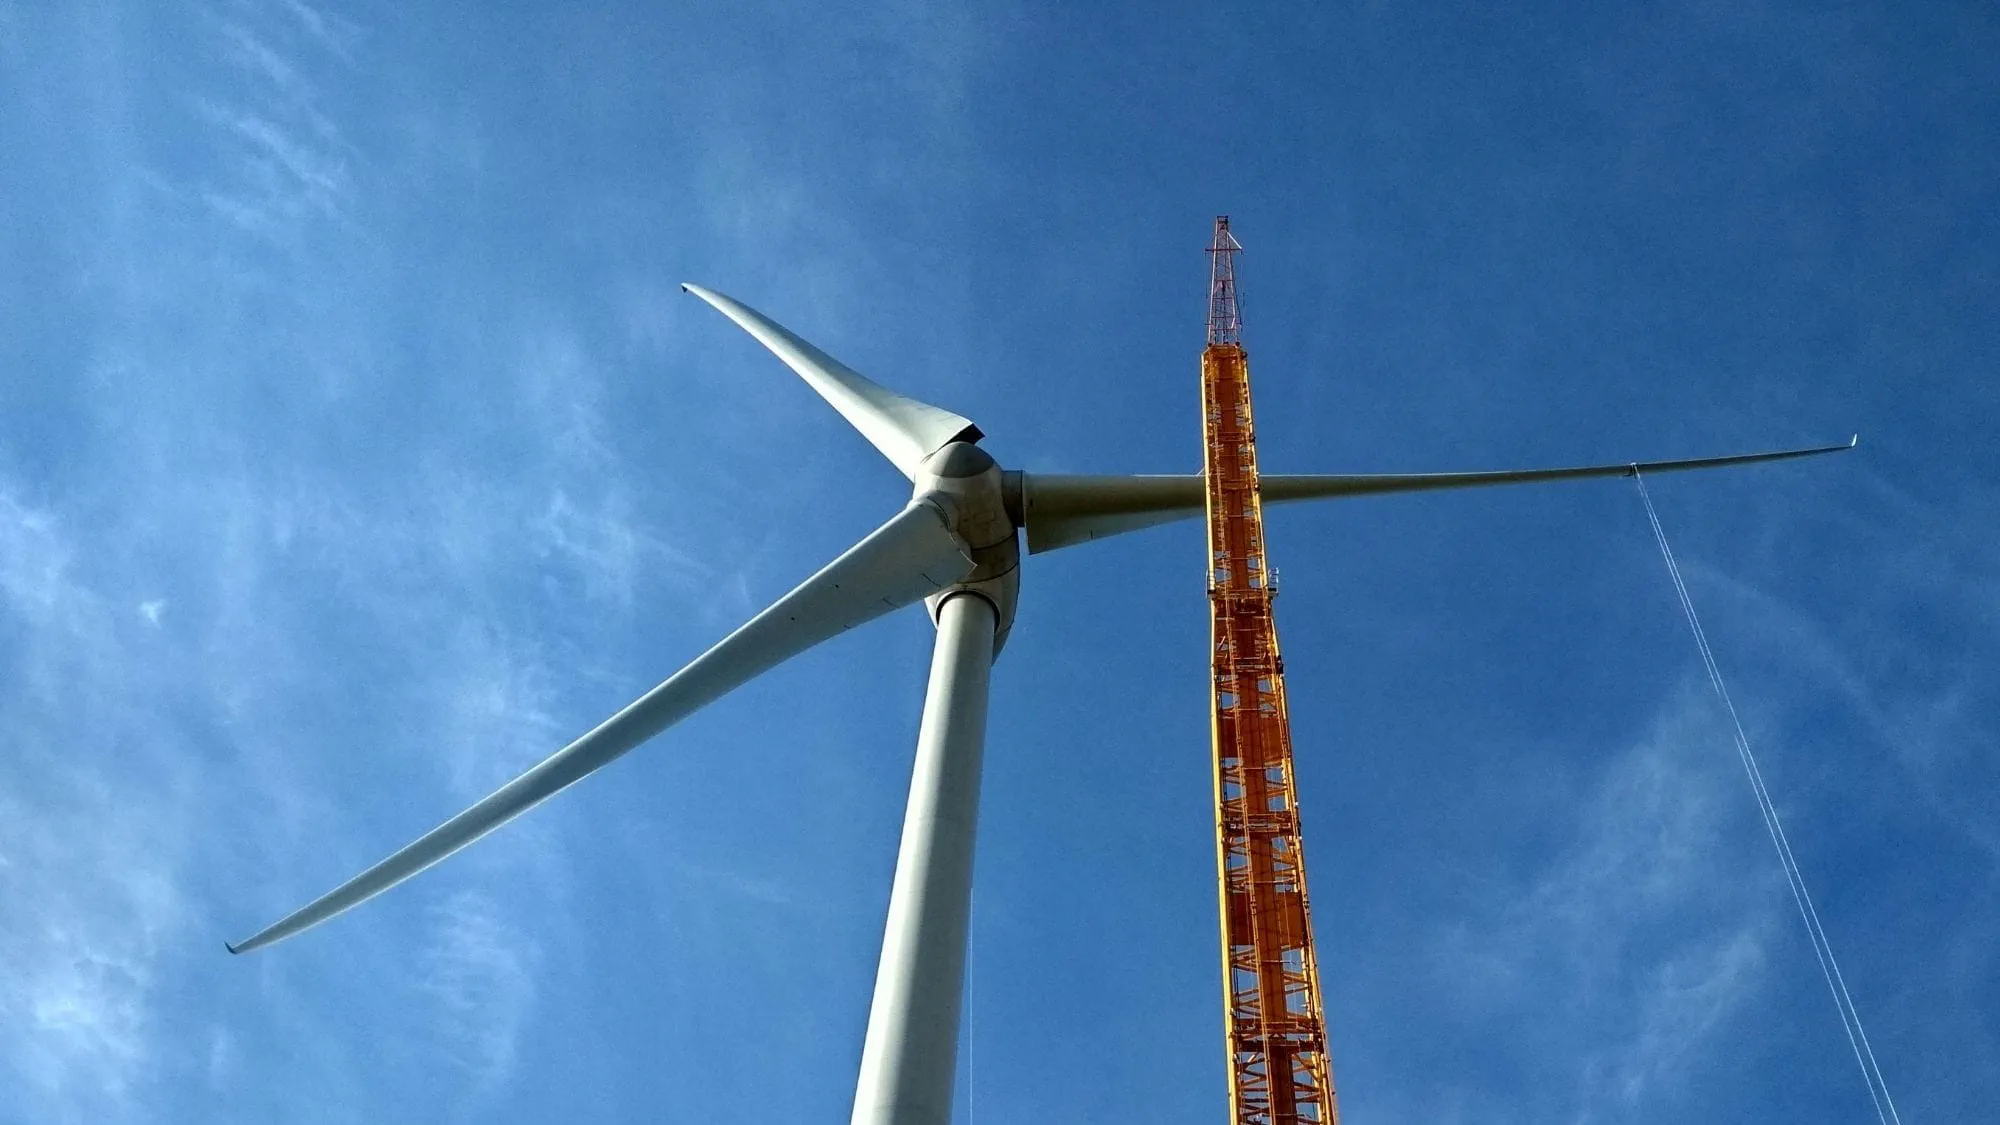  A close-up shot of the construction of the new wind turbine at DePuy in Loughbeg, Cork.